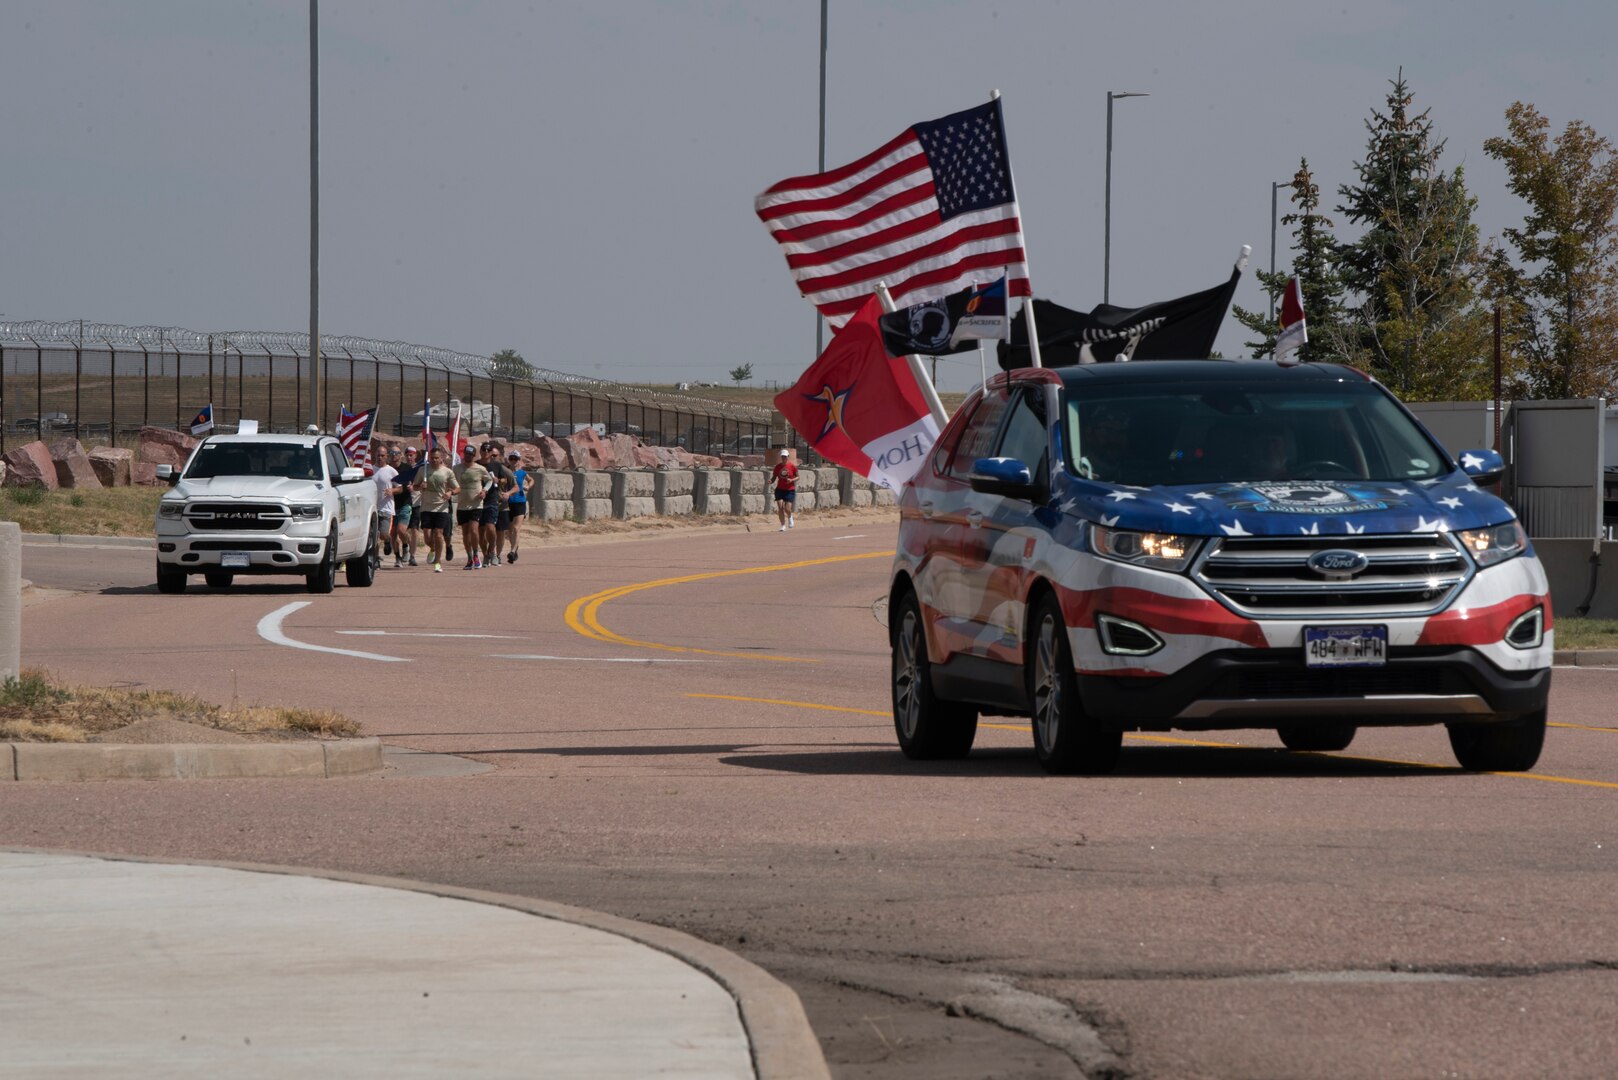 Police escort runners during event honoring fallen service members